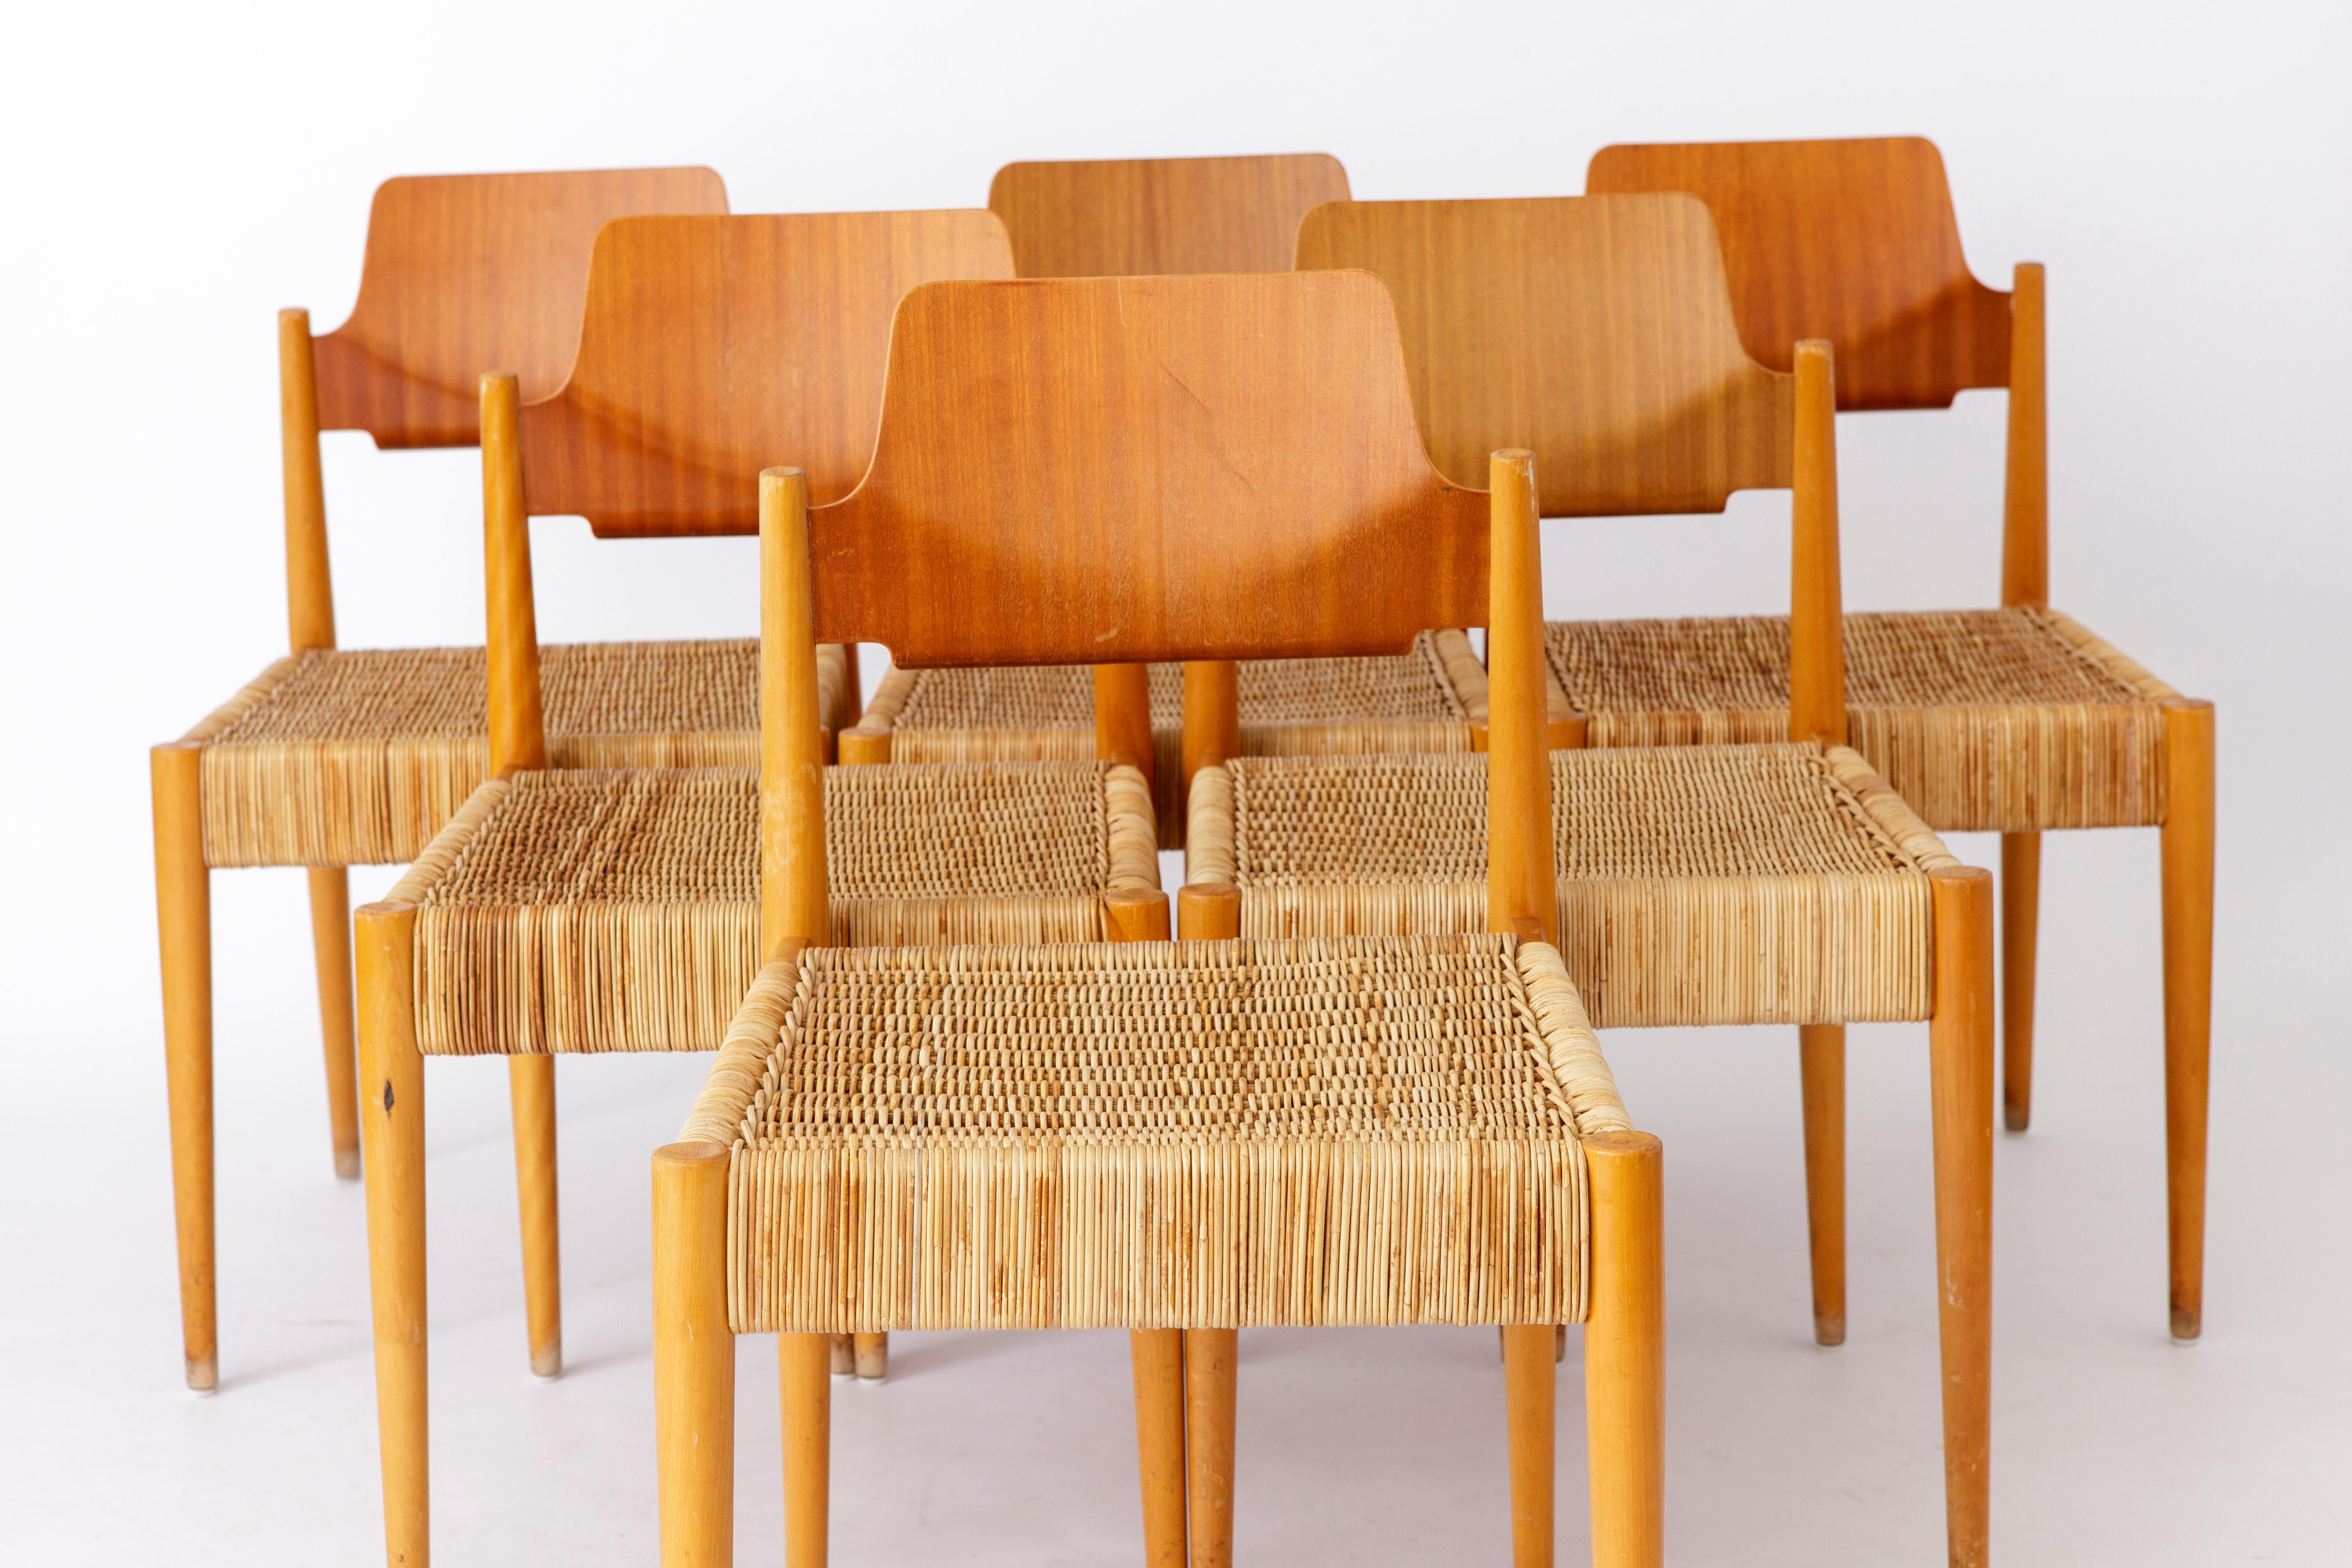 6 unique chairs from Germany Bauhaus designer Egon Eiermann for the manufacturer Wilde + Spieth. 
Model: SE19 from 1953. 
The chairs were used in an old church and have a shelf in the back for a hymnal. 
Beech wood frame in good stable condition, as